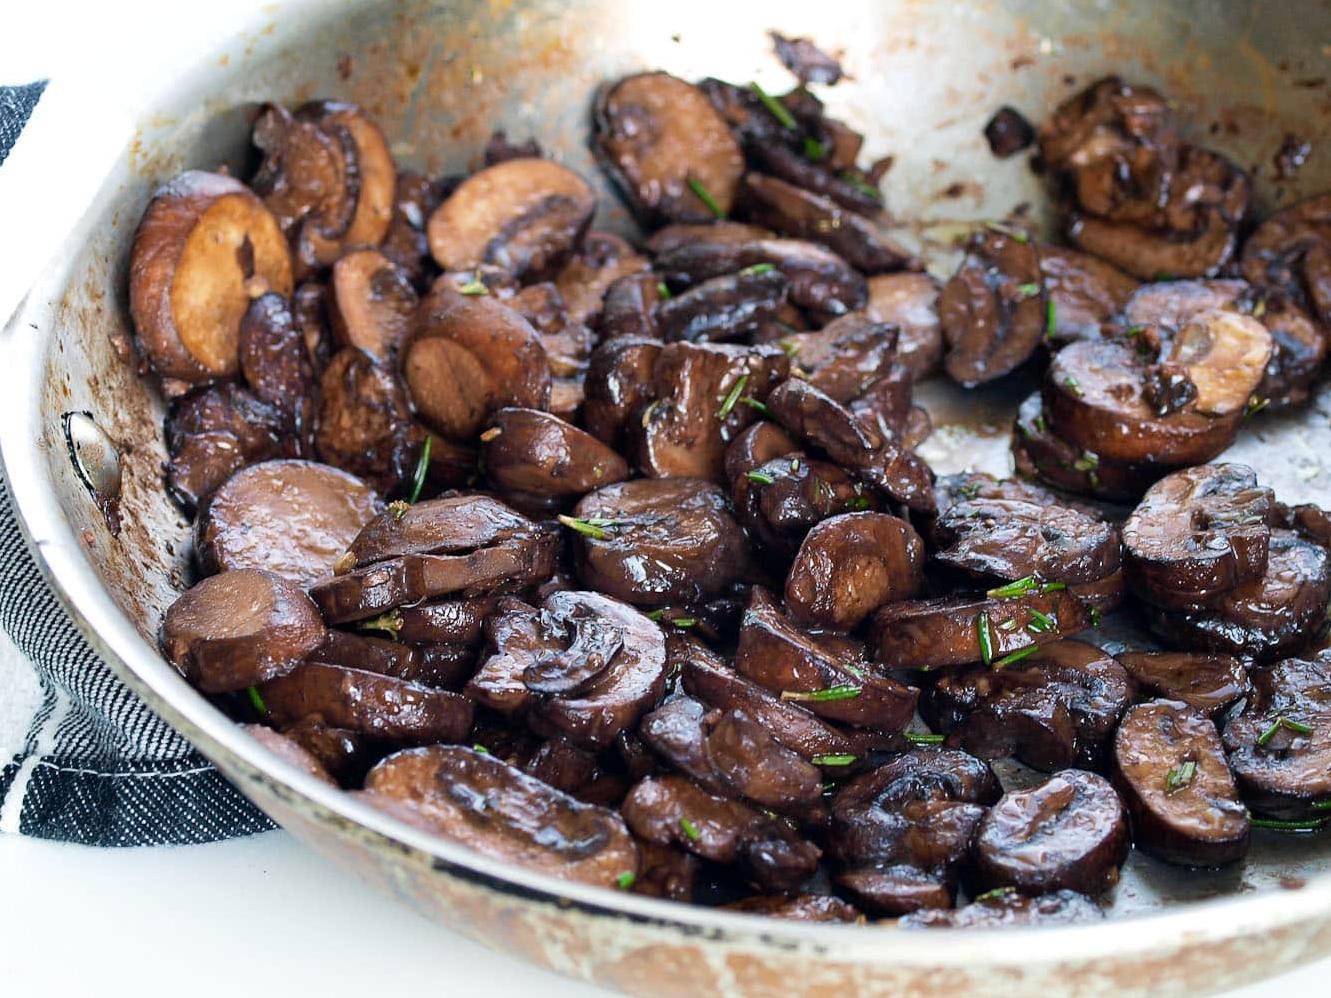  The savory scent of sauteed mushrooms with wine is irresistible.